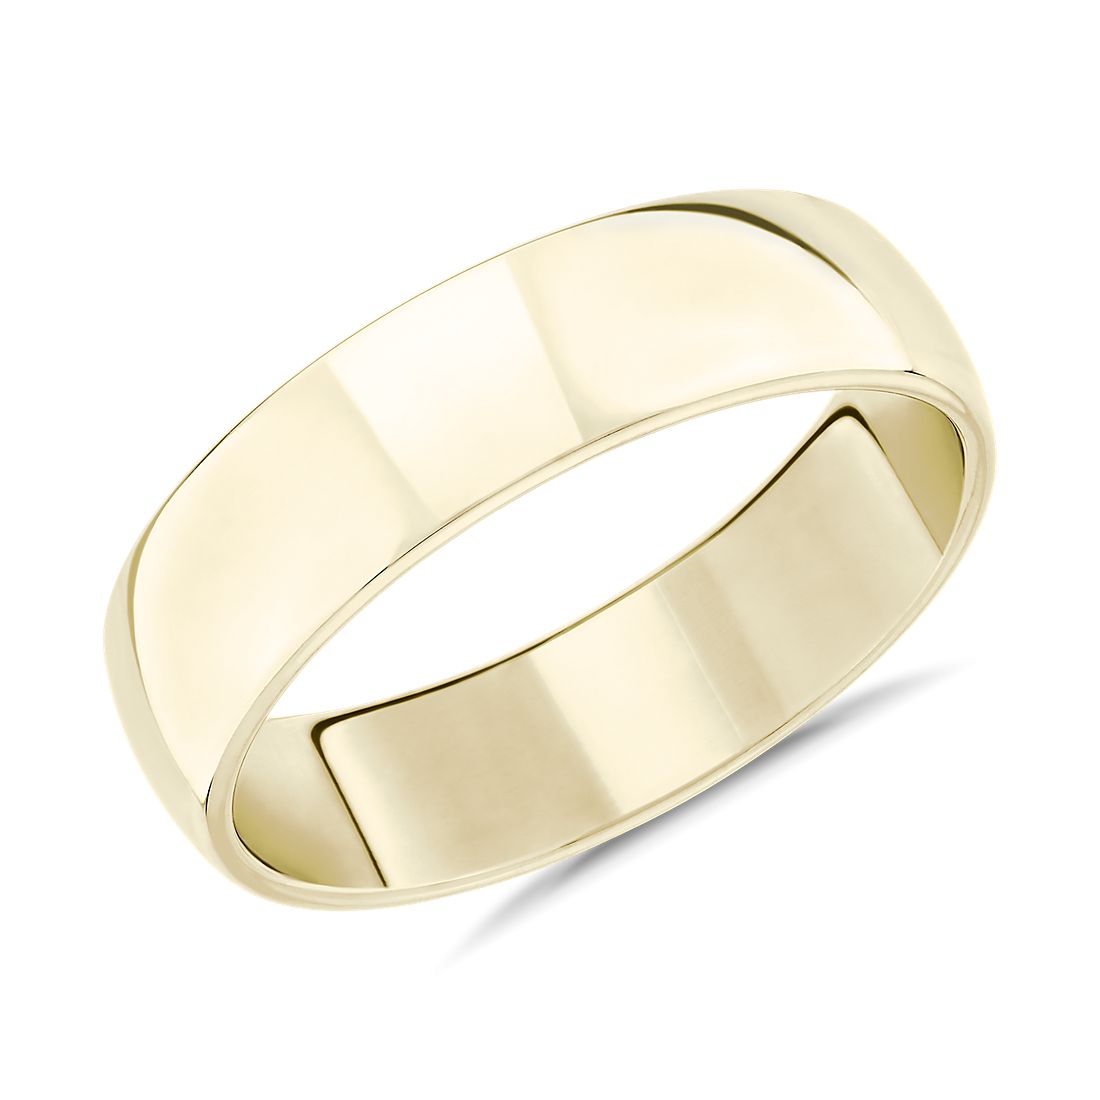 Skyline Comfort Fit Wedding Ring in 14k Yellow Gold (6 mm)